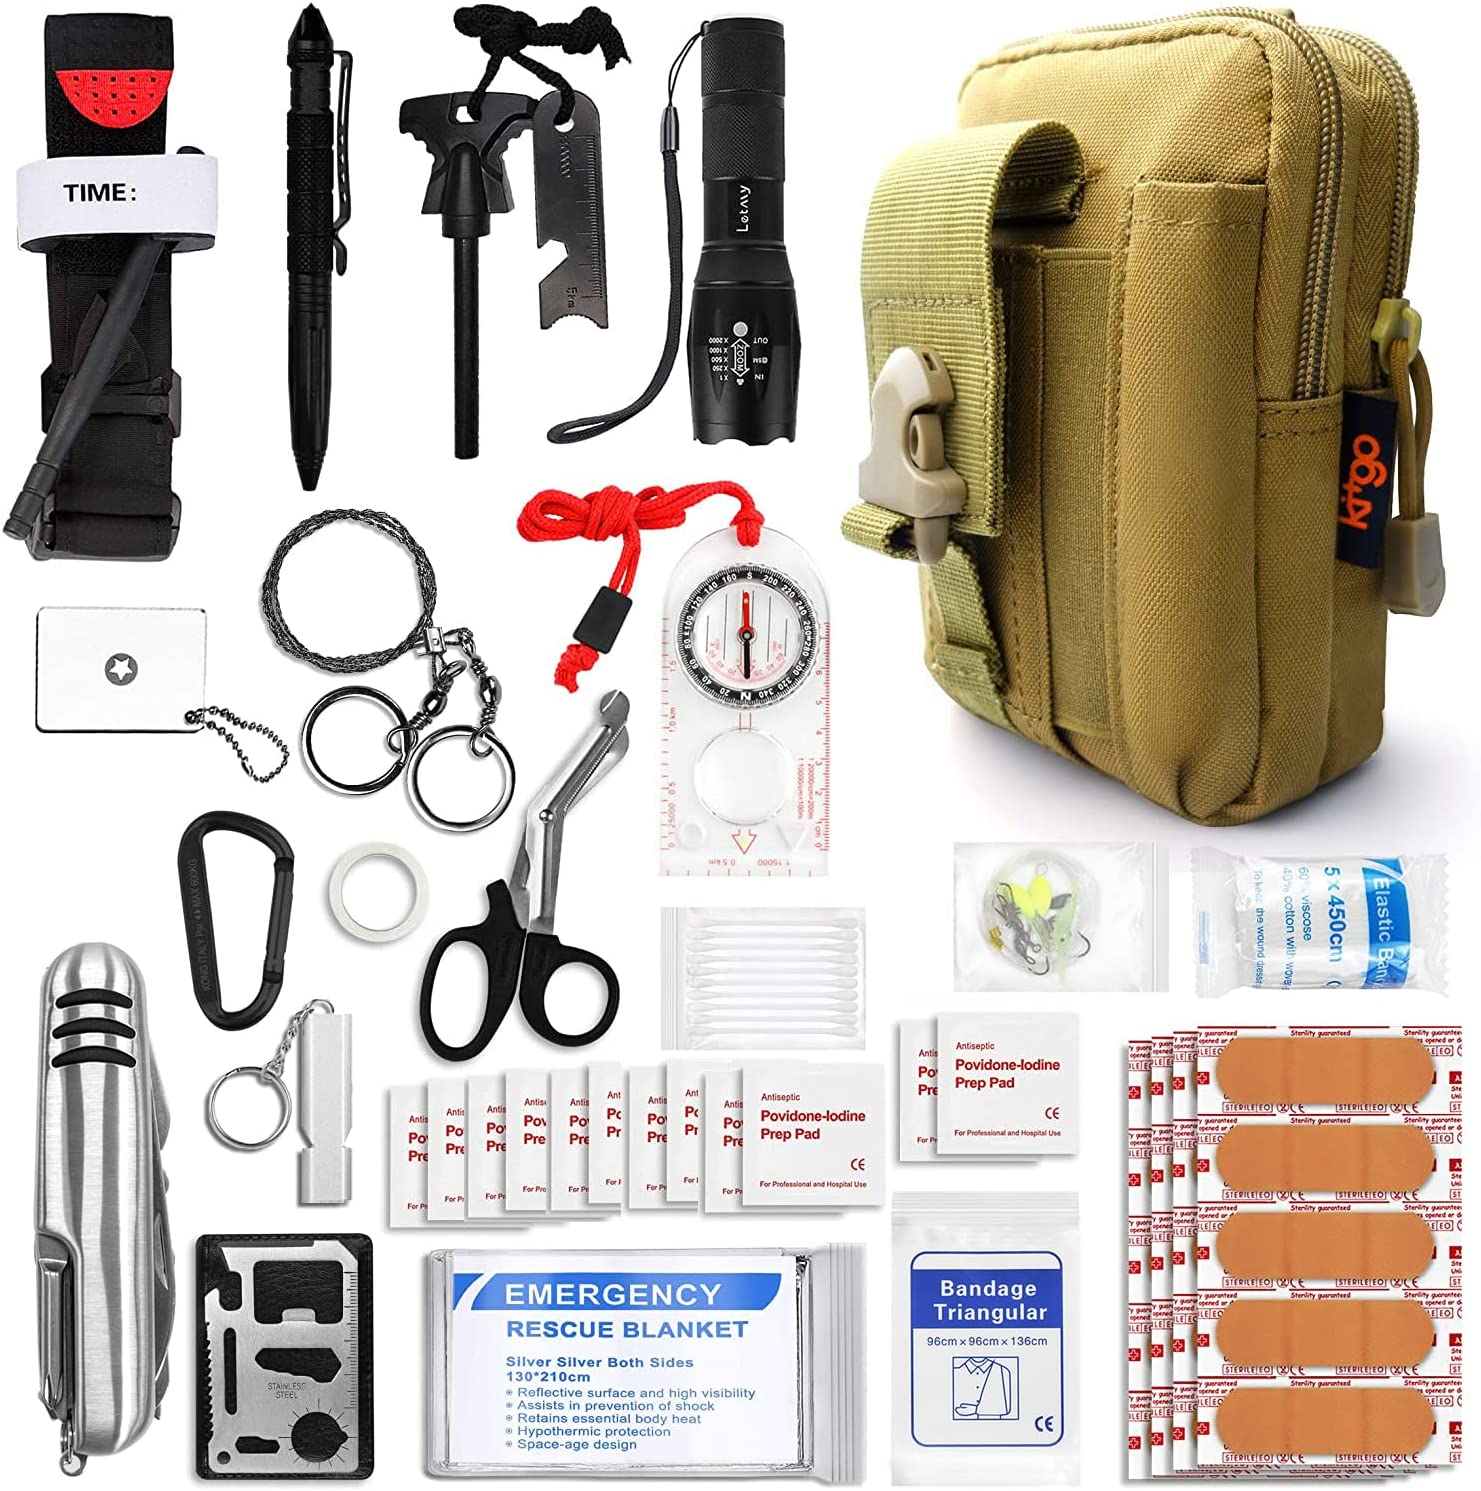 Kitgo Camping Emergency Tourniquet Survival Kit Safety First Aid Kit with Pro Tool Outdoor Survival Gear Tactical Small Molle Pouch for Home Hiking Hunting Adventures (Khaki)